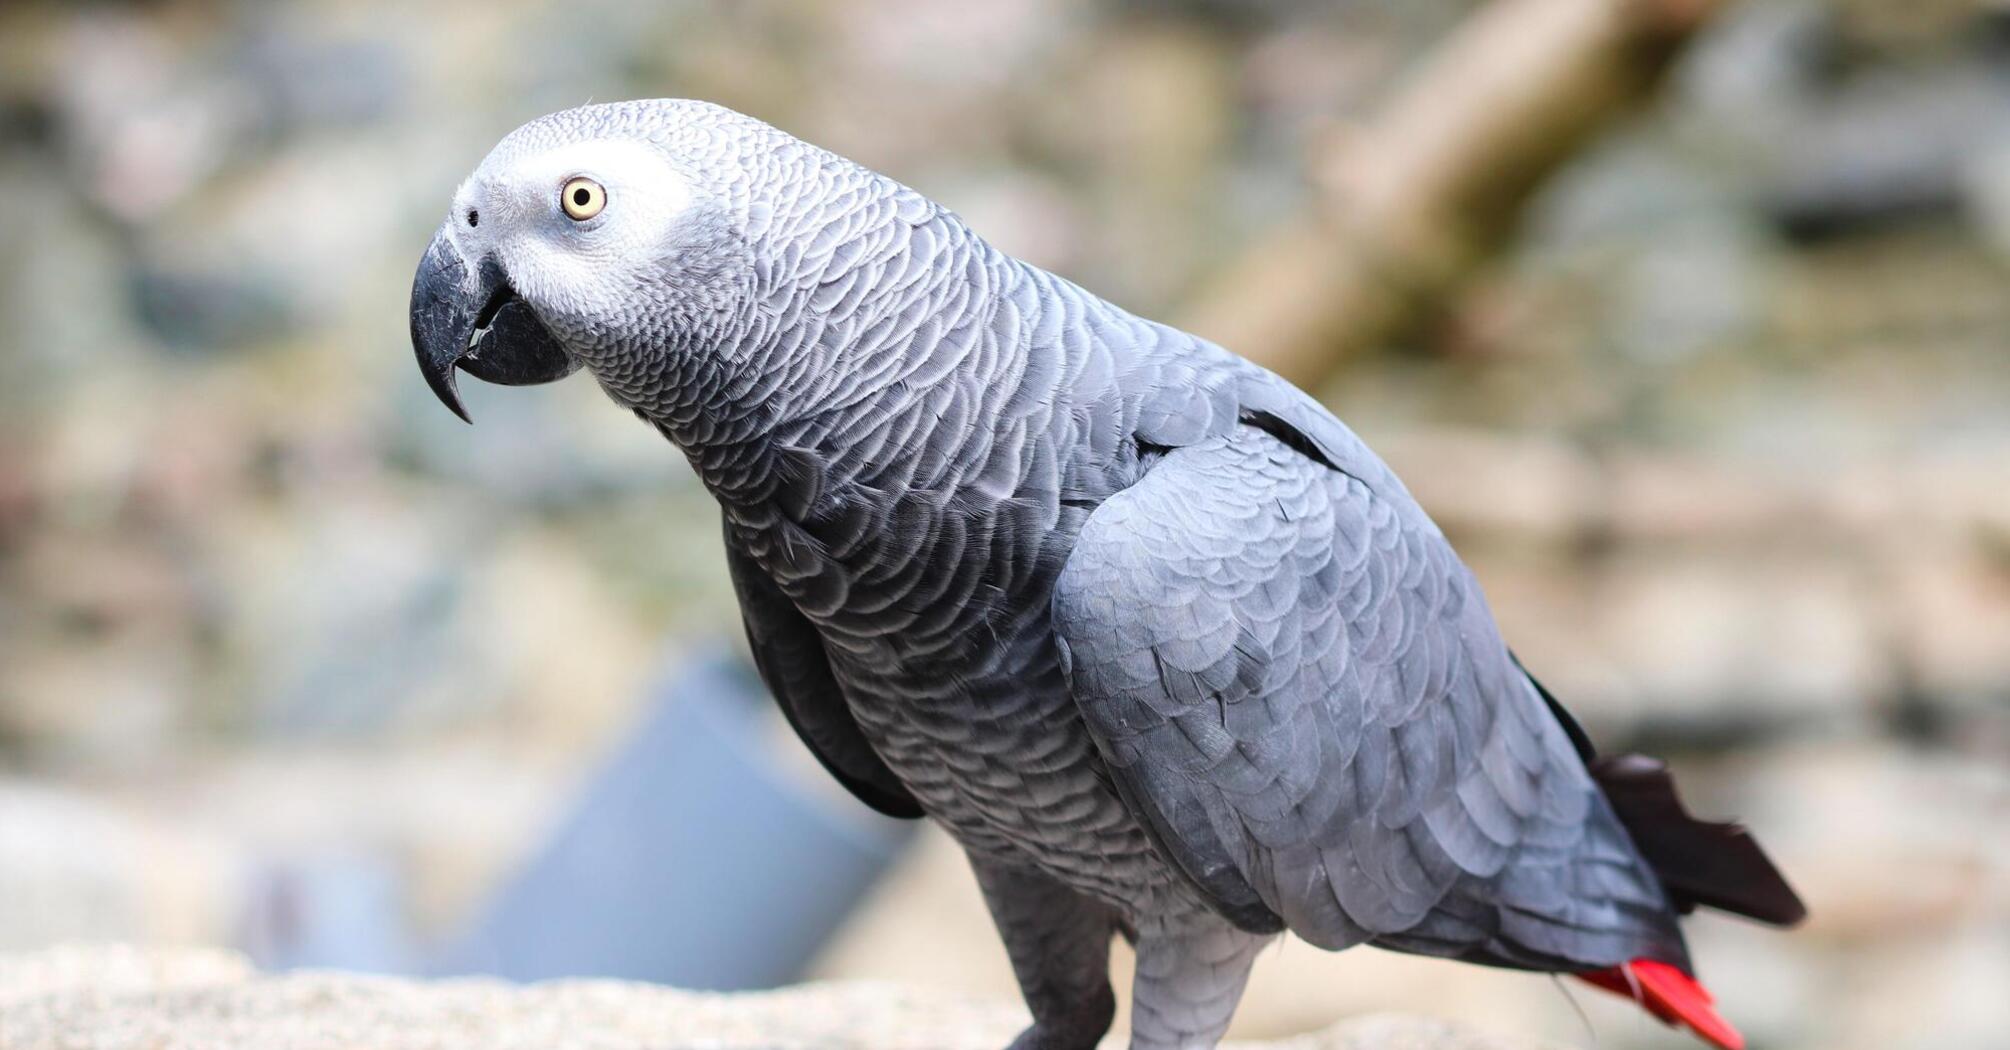 At a zoo in the United Kingdom, there are plans to combat parrot swearing